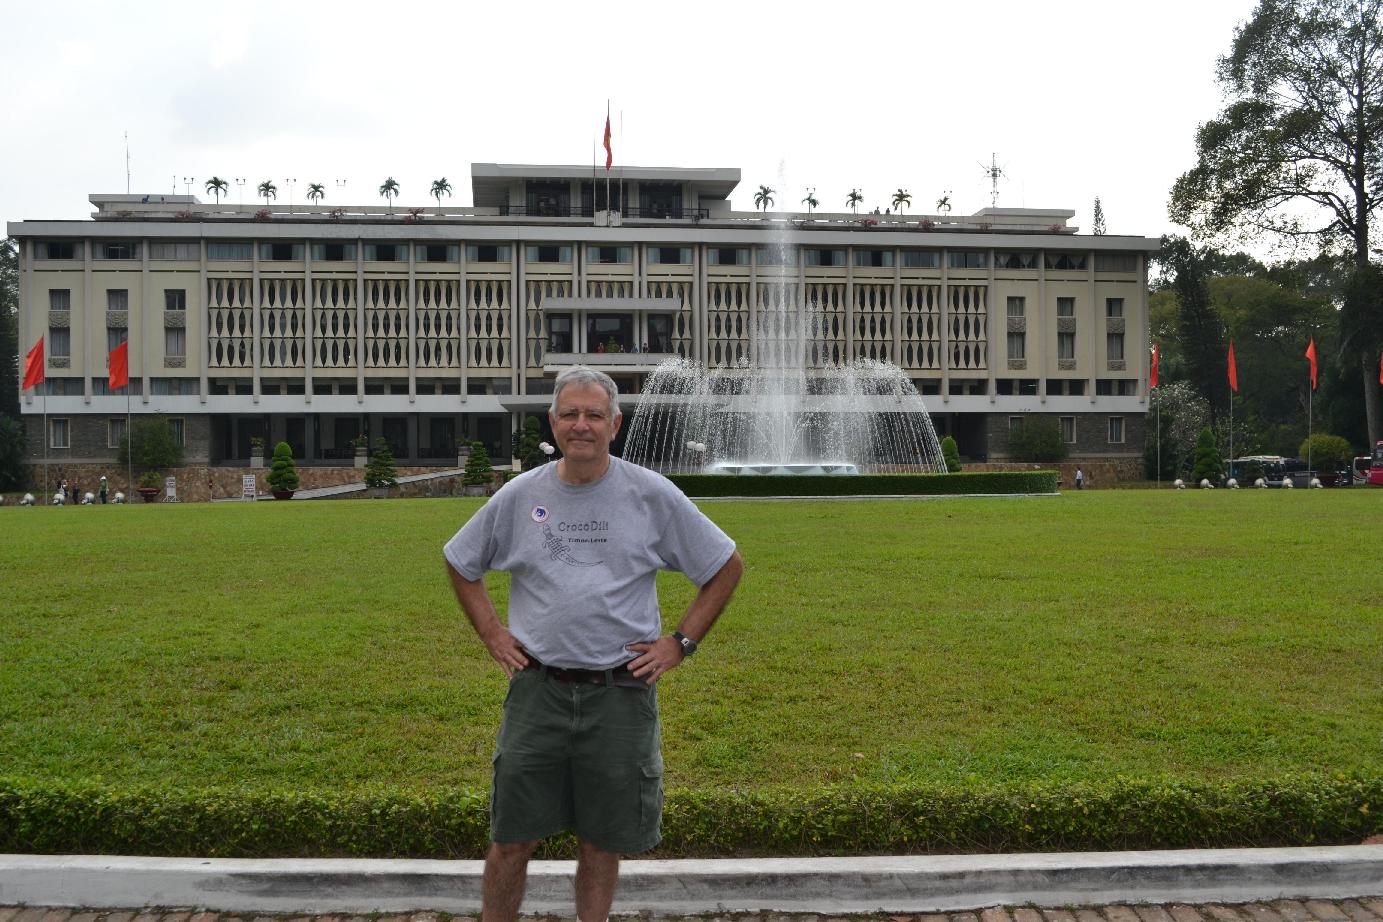 At the former Presidential Palace